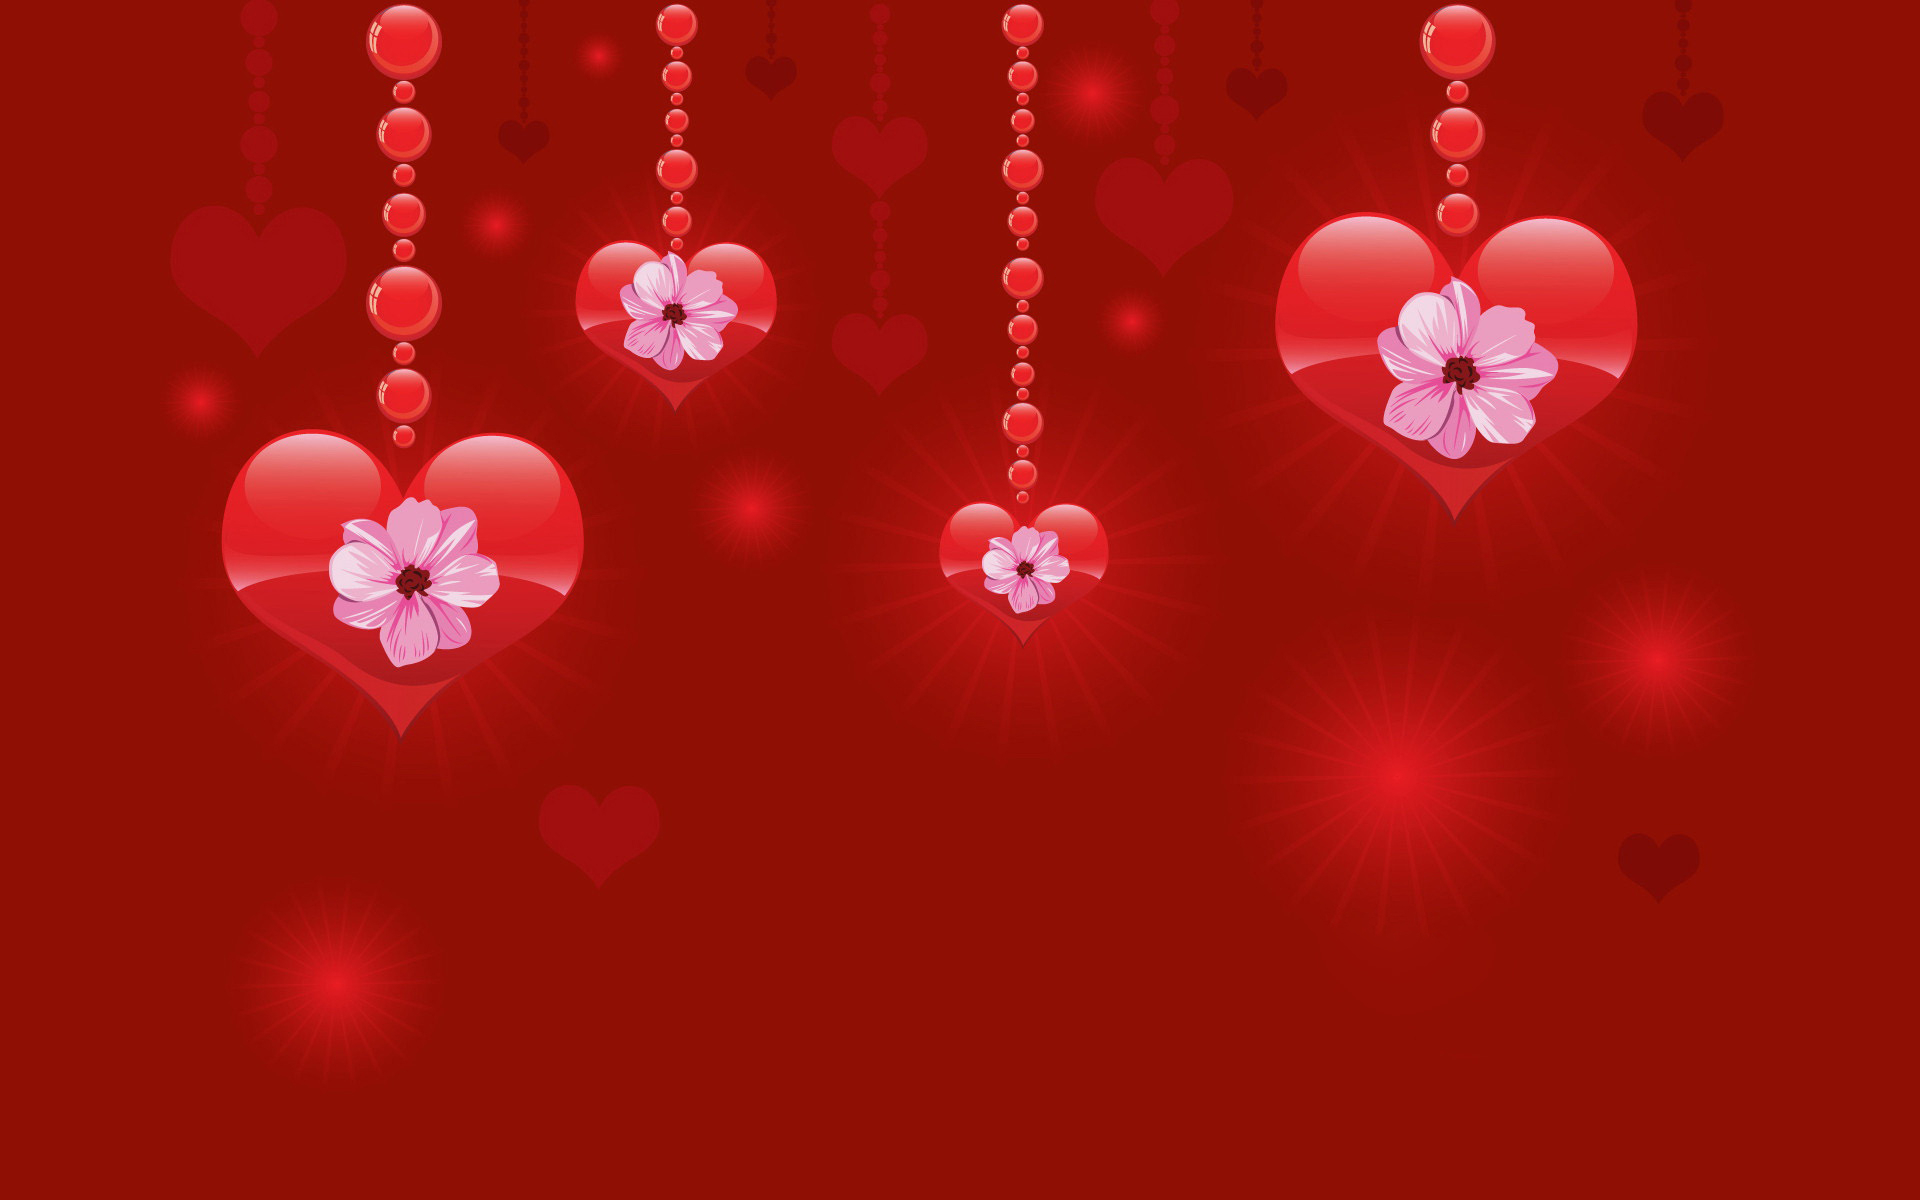 Heart at Valentines Day Desktop wallpapers 1920x1200